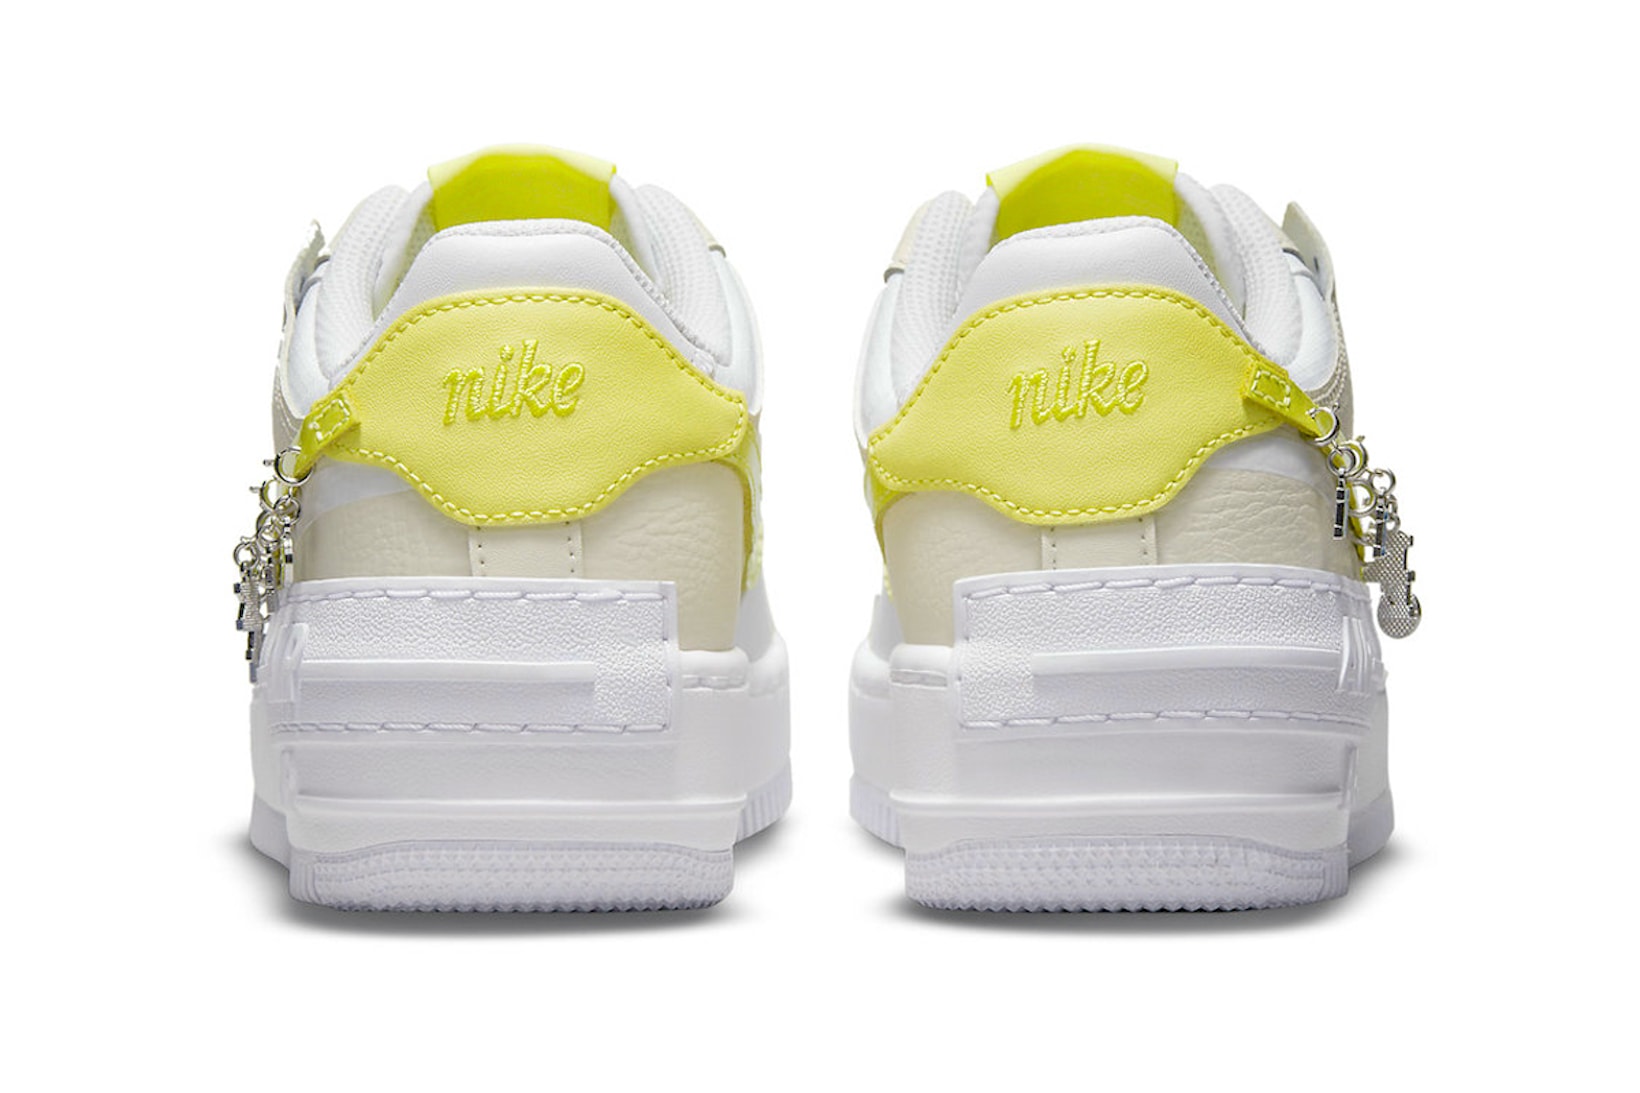 nike air force 1 shadow af1 womens sneakers have a day white yellow anklet charms footwear sneakerhead kicks shoes heel